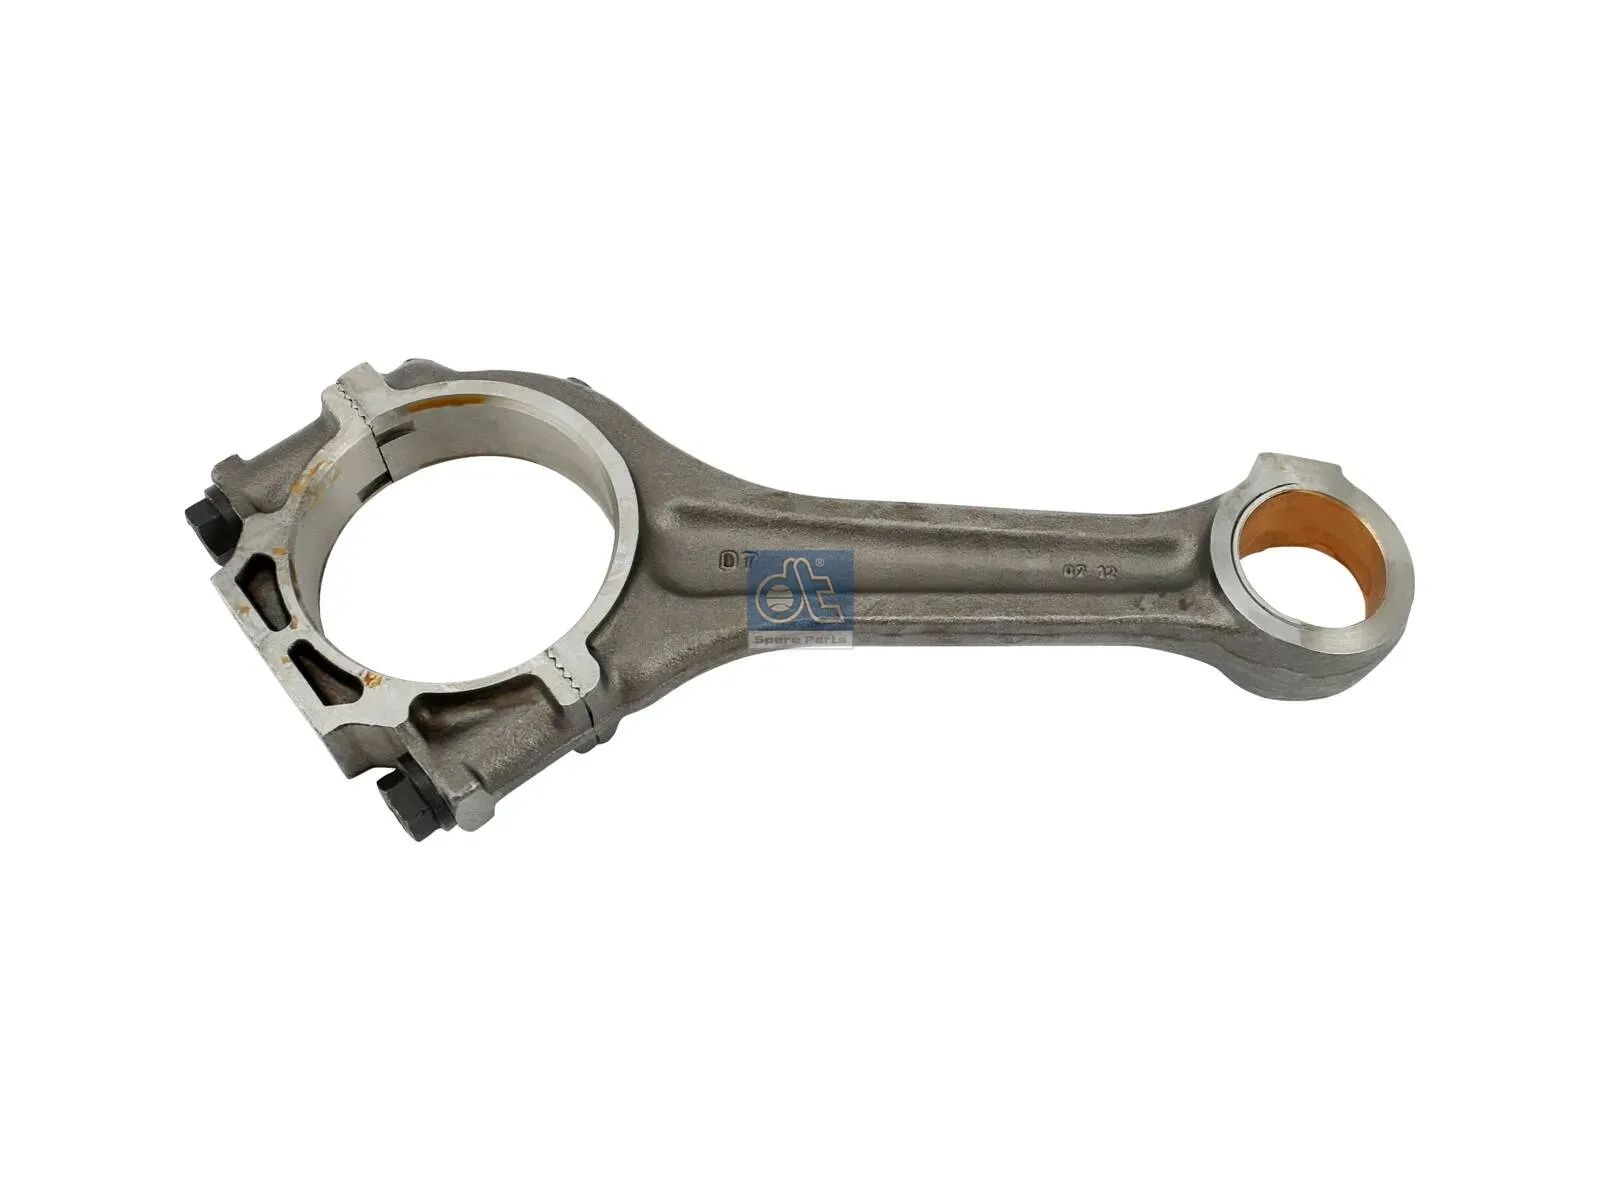 Connecting rod, conical head